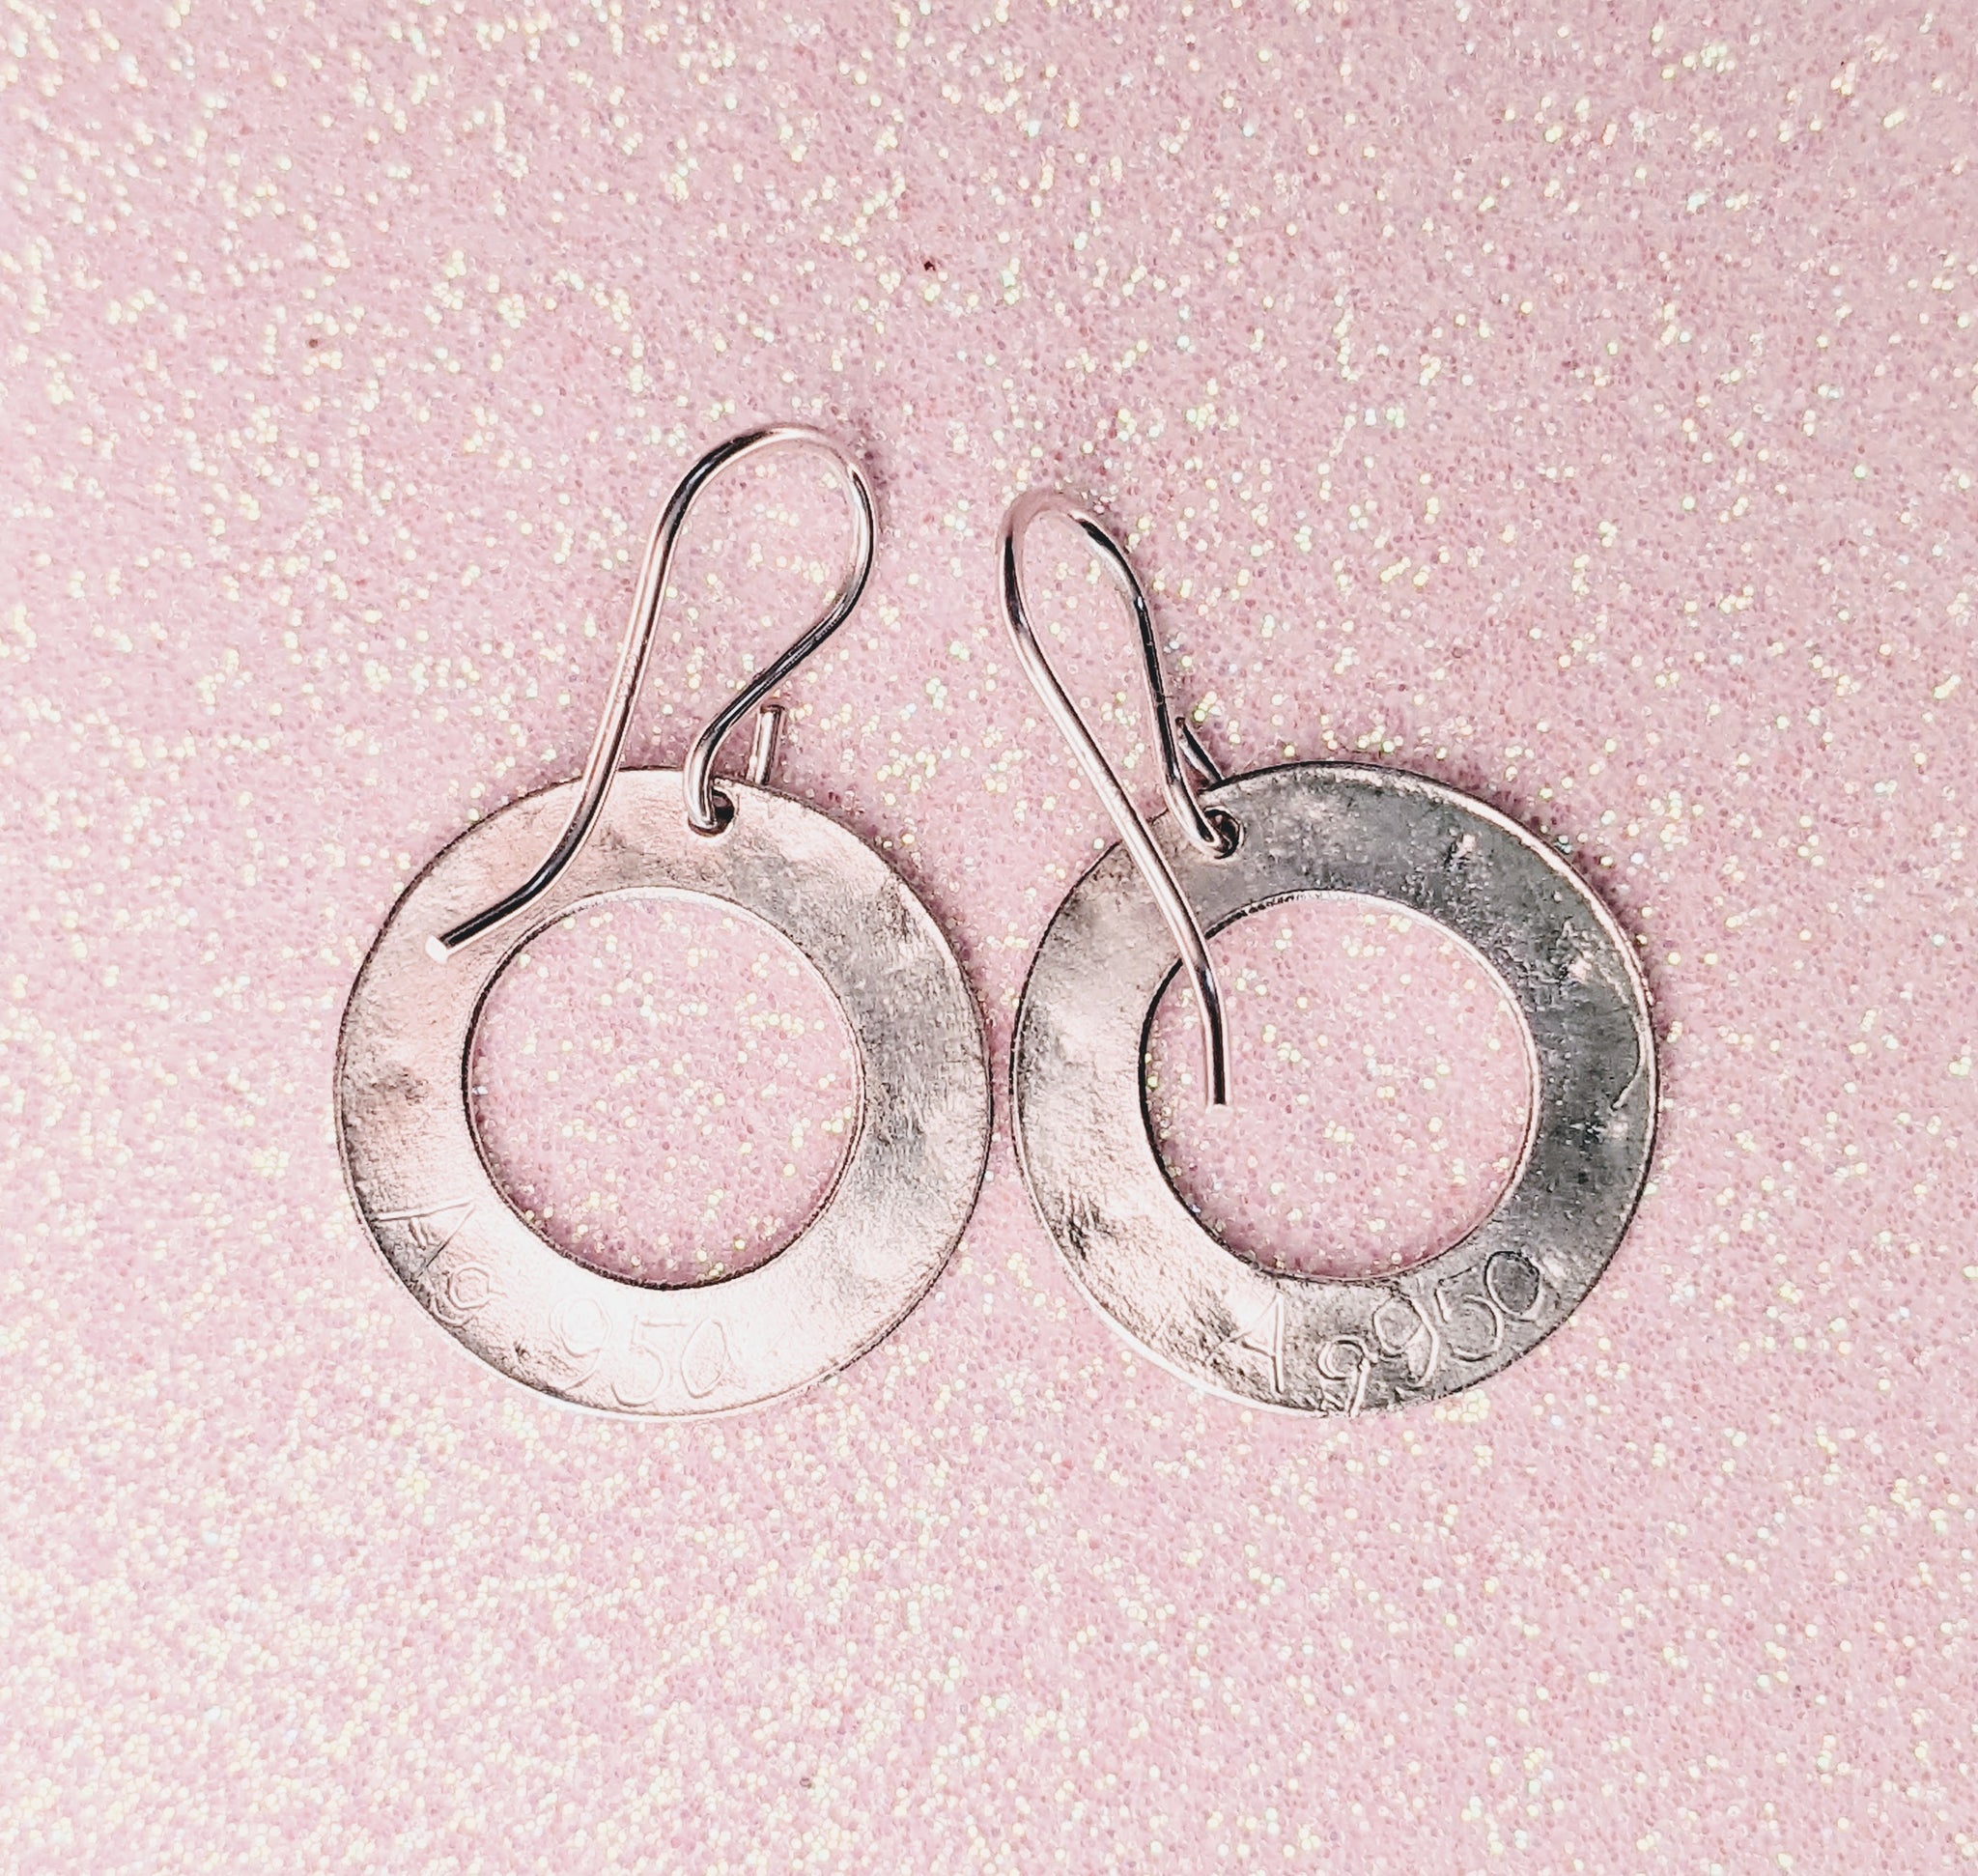 RING OF HEARTS EARRINGS | < Z-FIRE.COM > Tiny hearts are highlighted and polished on flat silver rings with a frosted background and highlighted and polished edges. .950 Fine Silver Rings About 11/16" Diameter About 18 mm Diameter .925 Sterling Silver Ear Wires